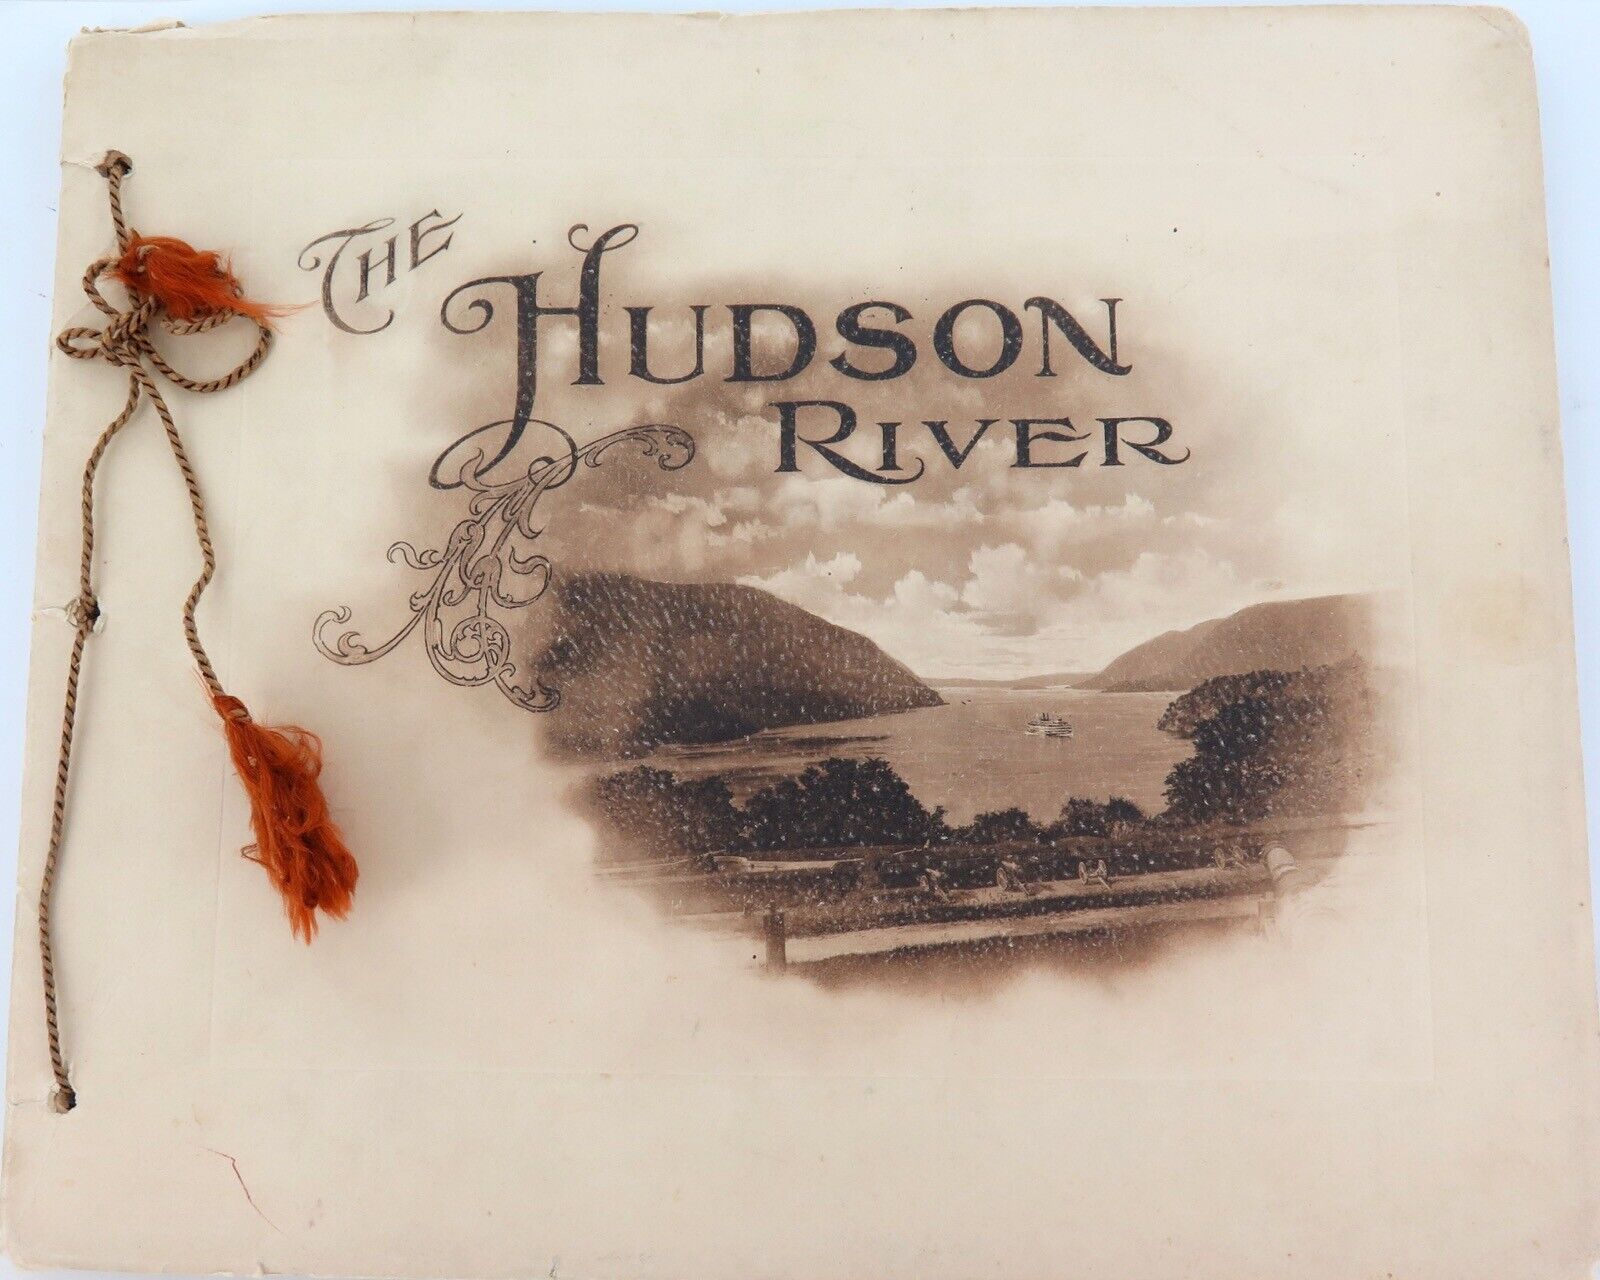 .SUPERB. EARLY 1900s THE HUDSON RIVER DAY LINE SCENIC LARGE SOUVENIR BOOKLET.